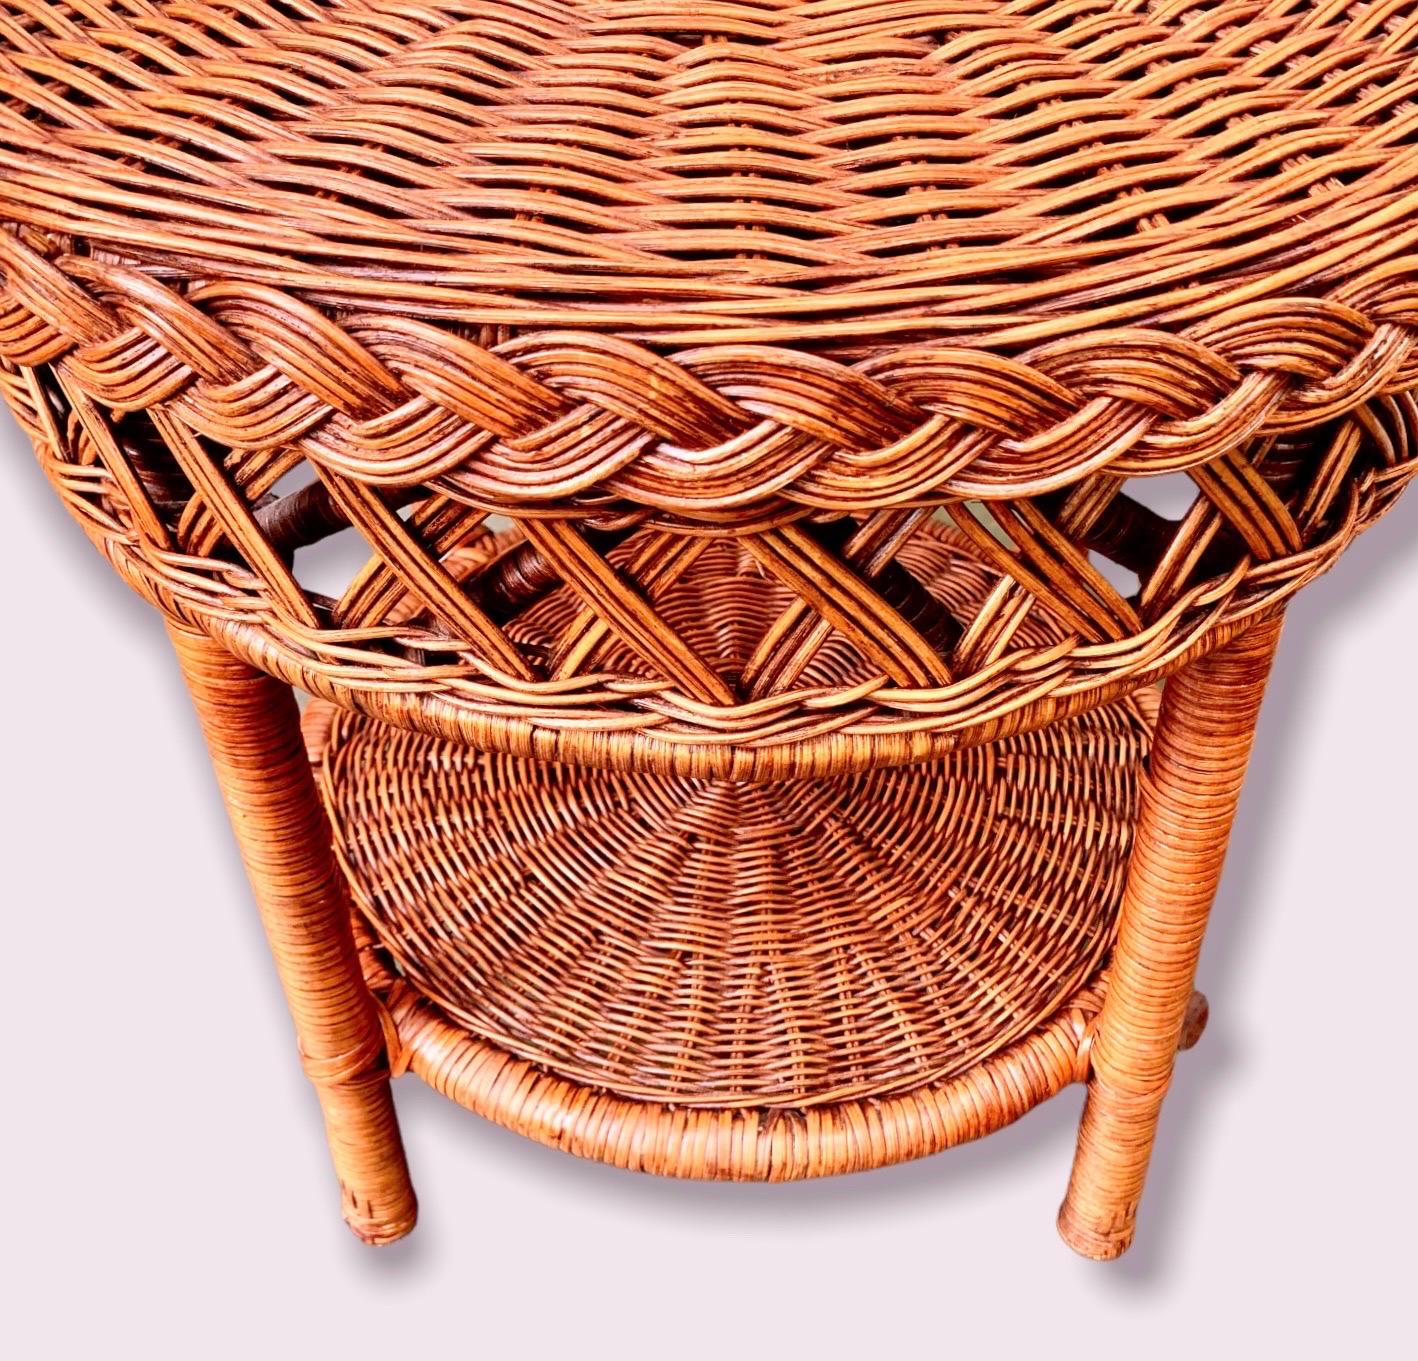 Hand-Crafted Vintage Wicker over Rattan Rd. End/Side Table